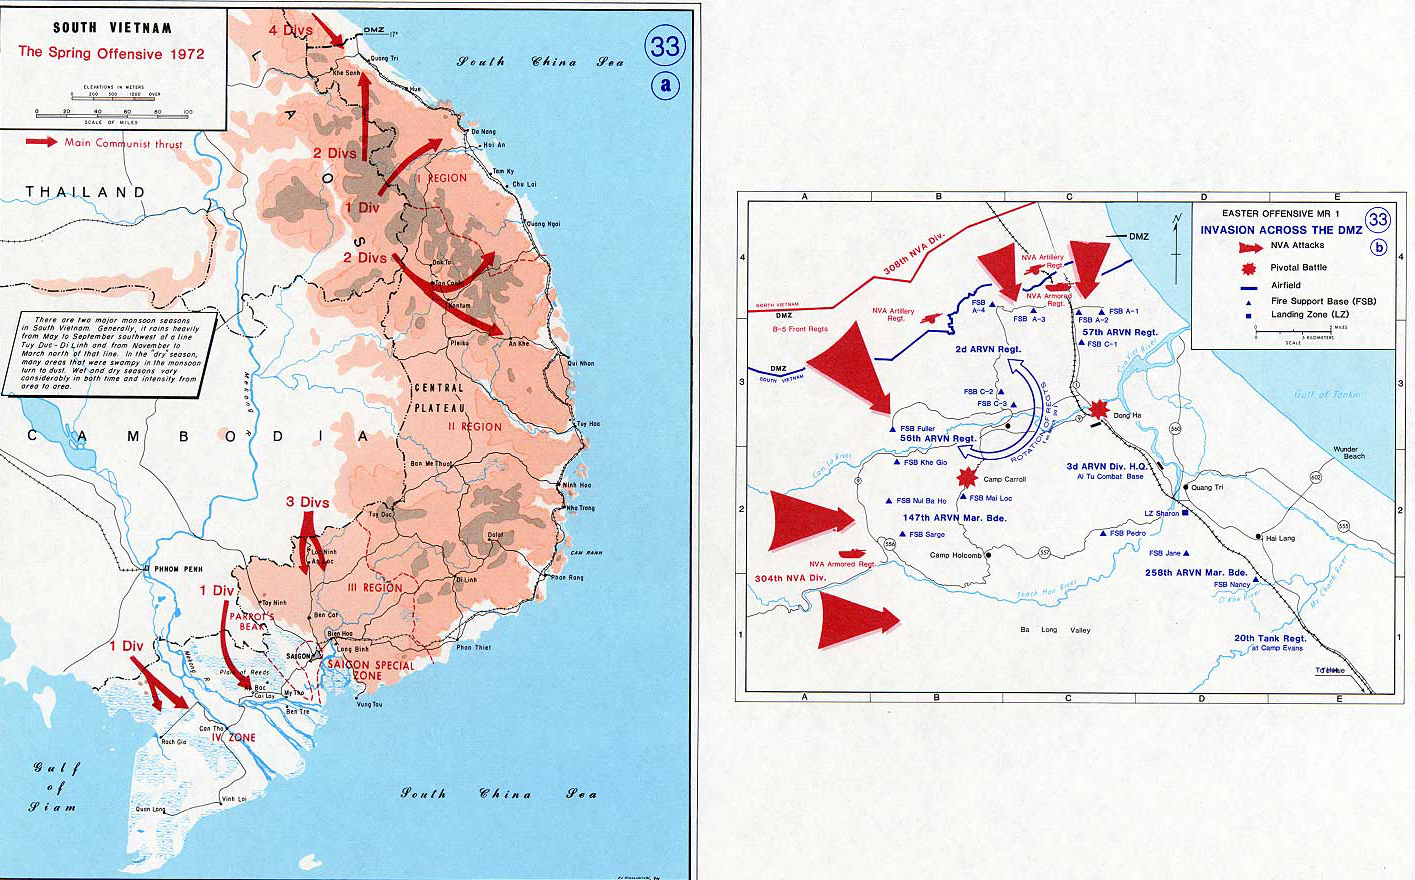 History Map of the Vietnam War. South Vietnam, Spring Offensive 1972, Invasion Across the DMZ.